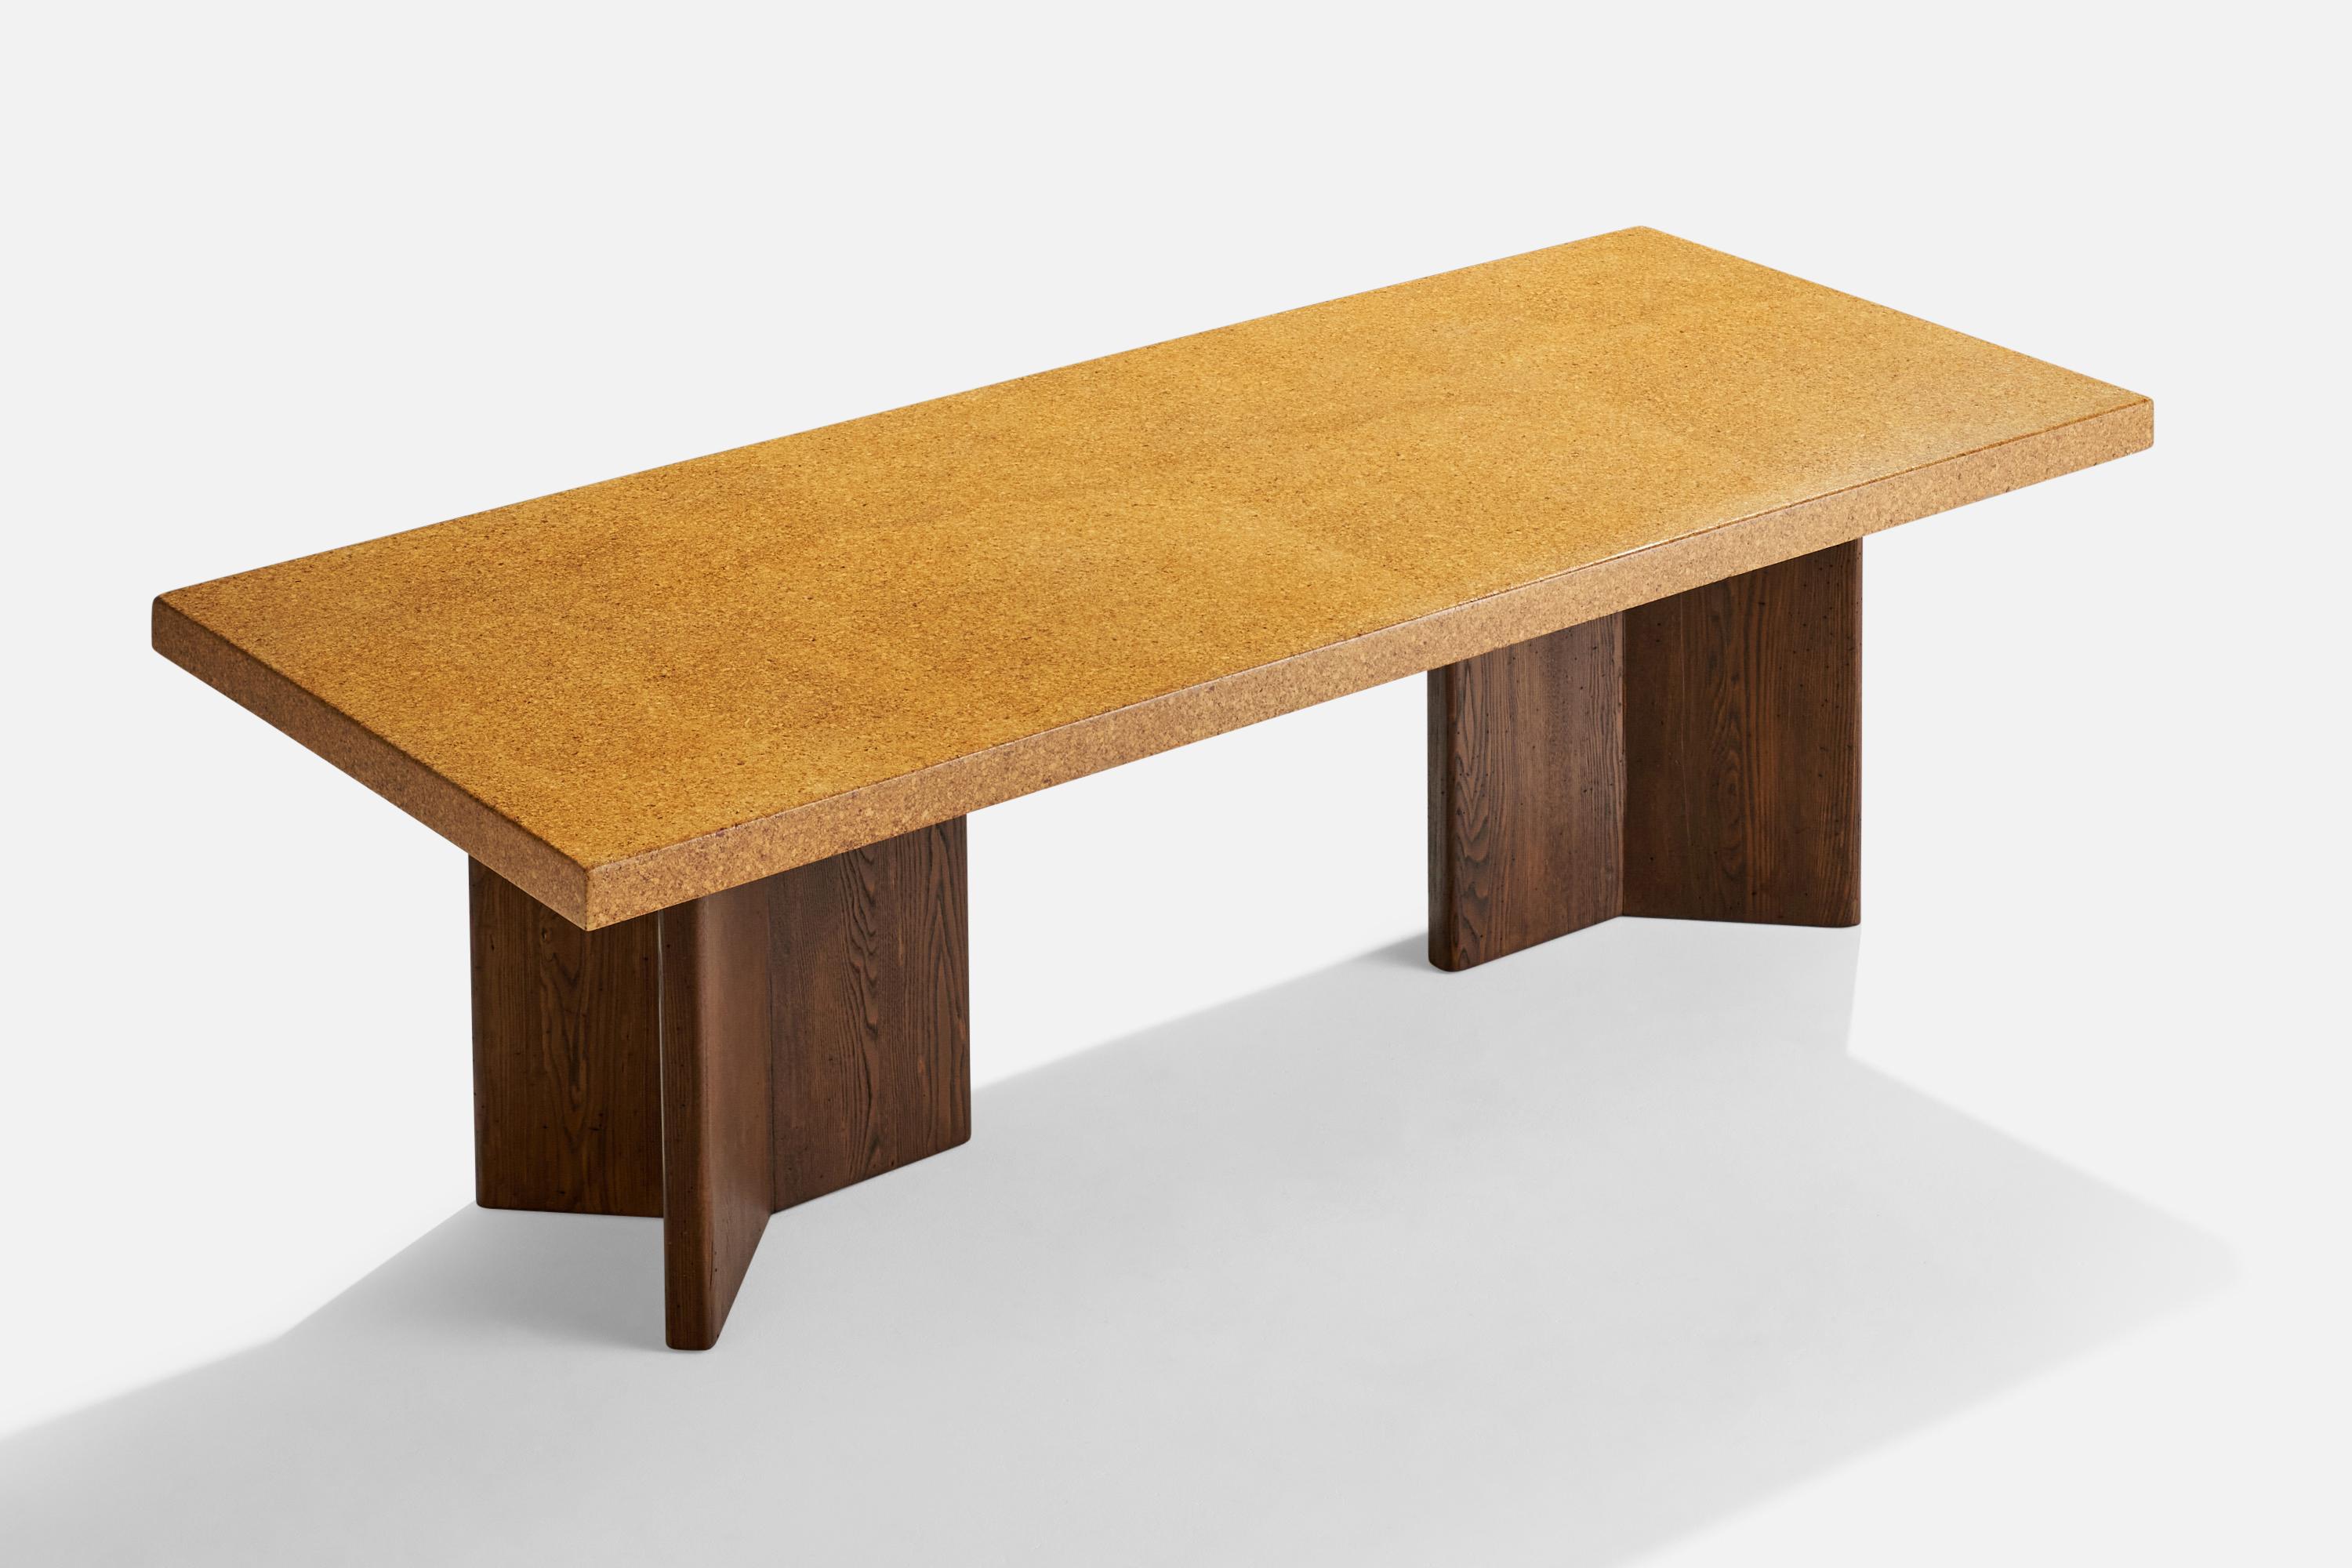 A cork and stained mahogany dining table designed by Paul Frankl and produced by Johnson Furniture Company, USA, c. 1940s.